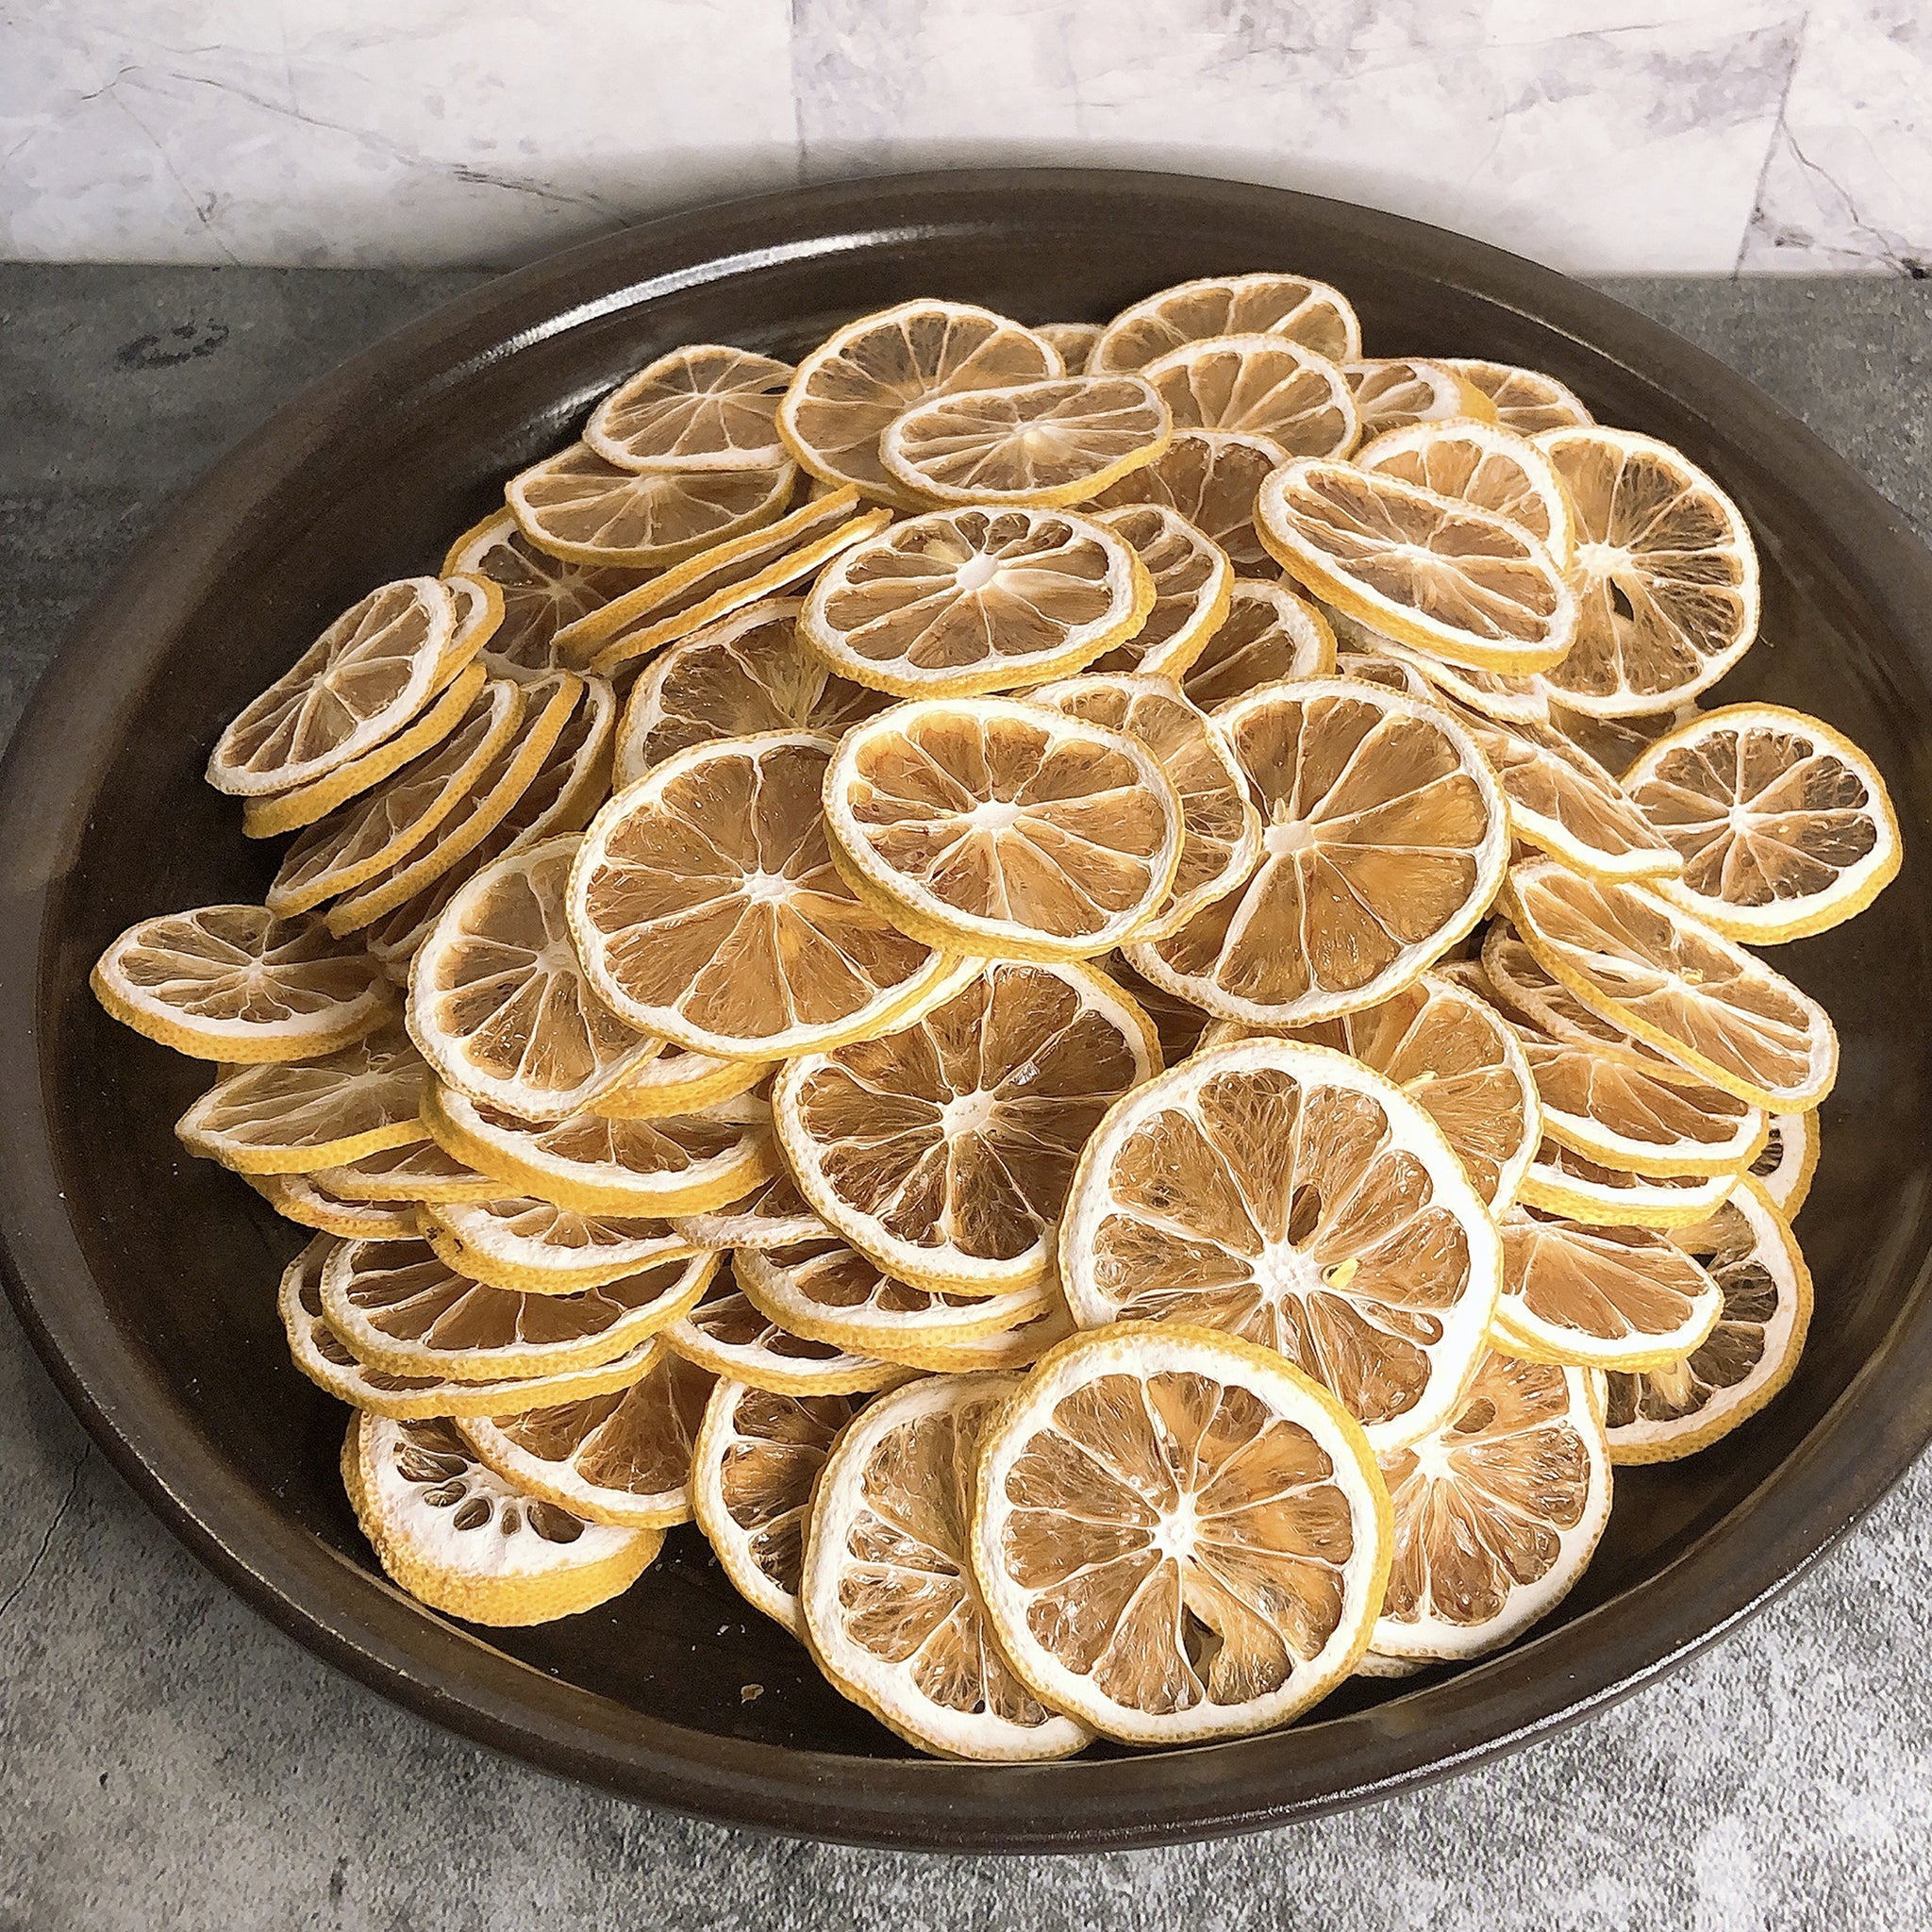 What to do with (really) dried lemon slices? - Kitchen Consumer - eGullet  Forums